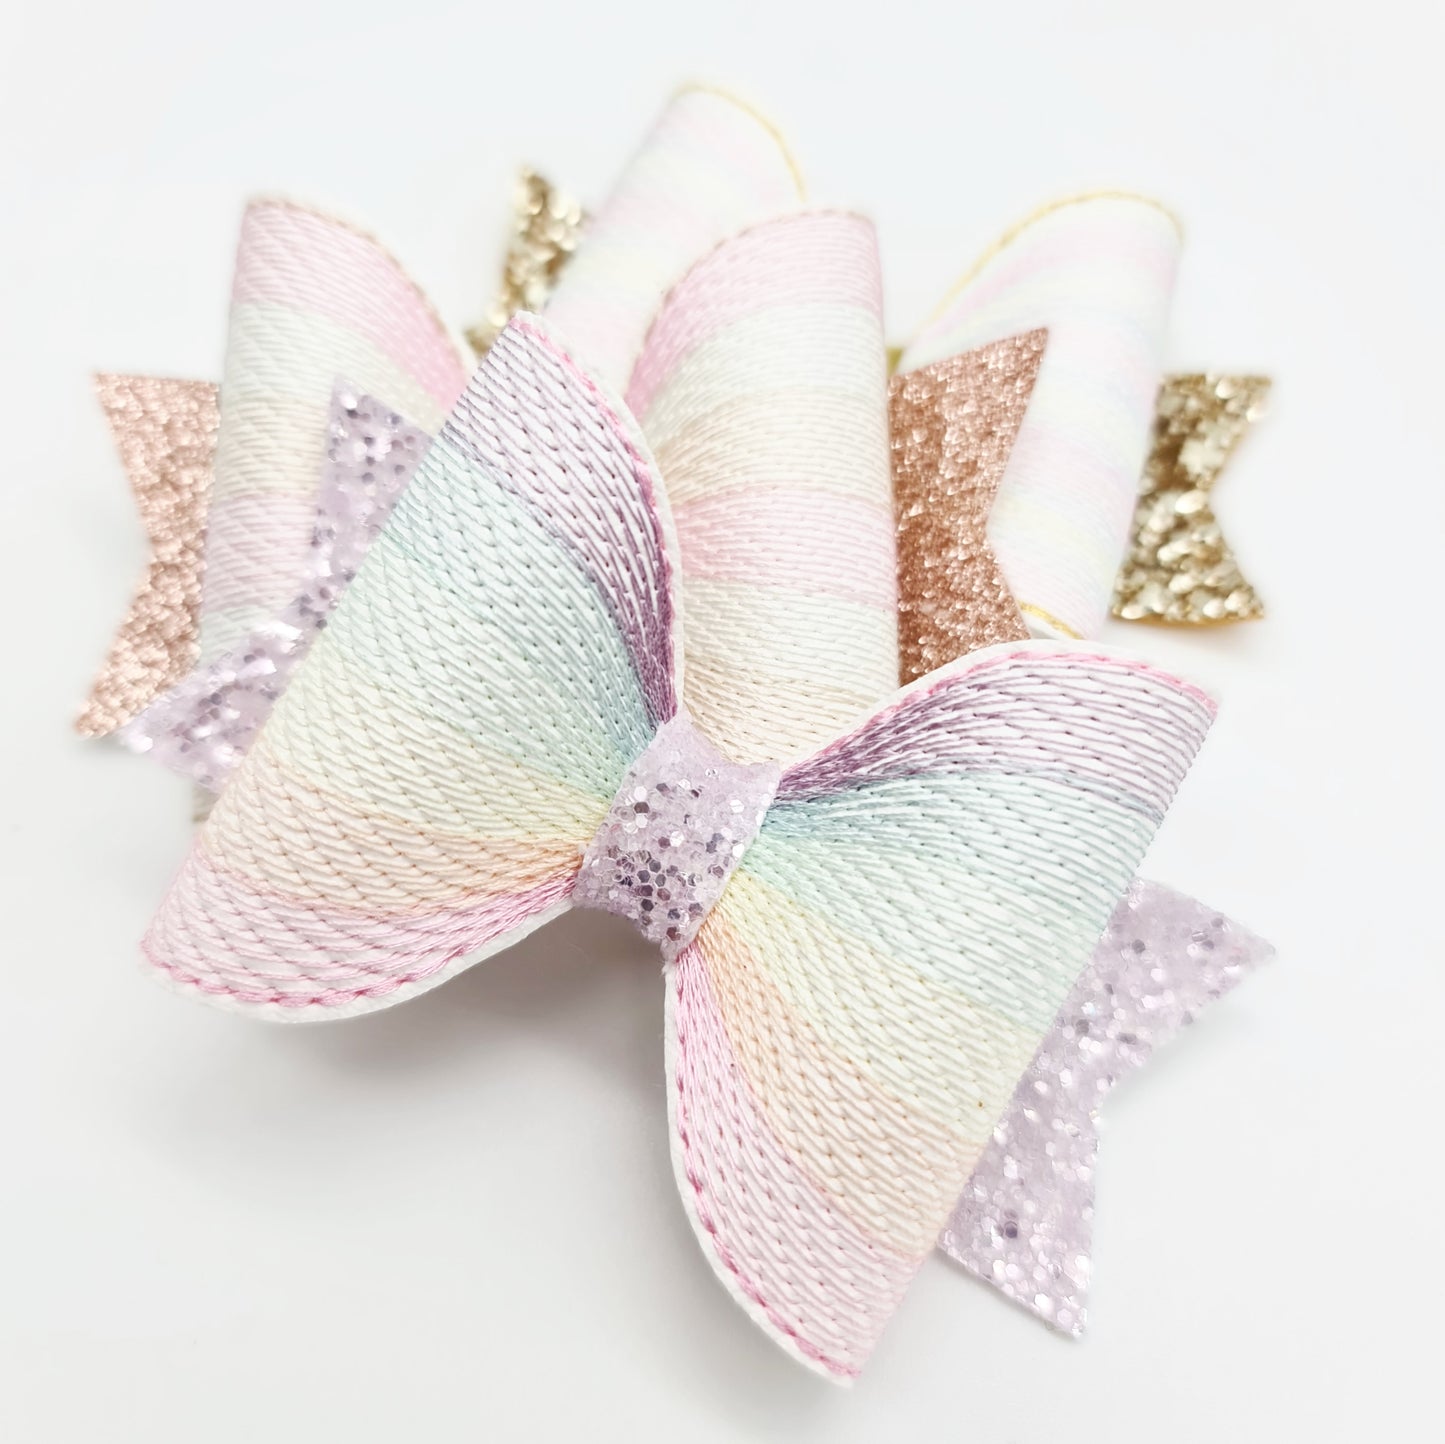 Rainbow of Stitches Embroidered Bows